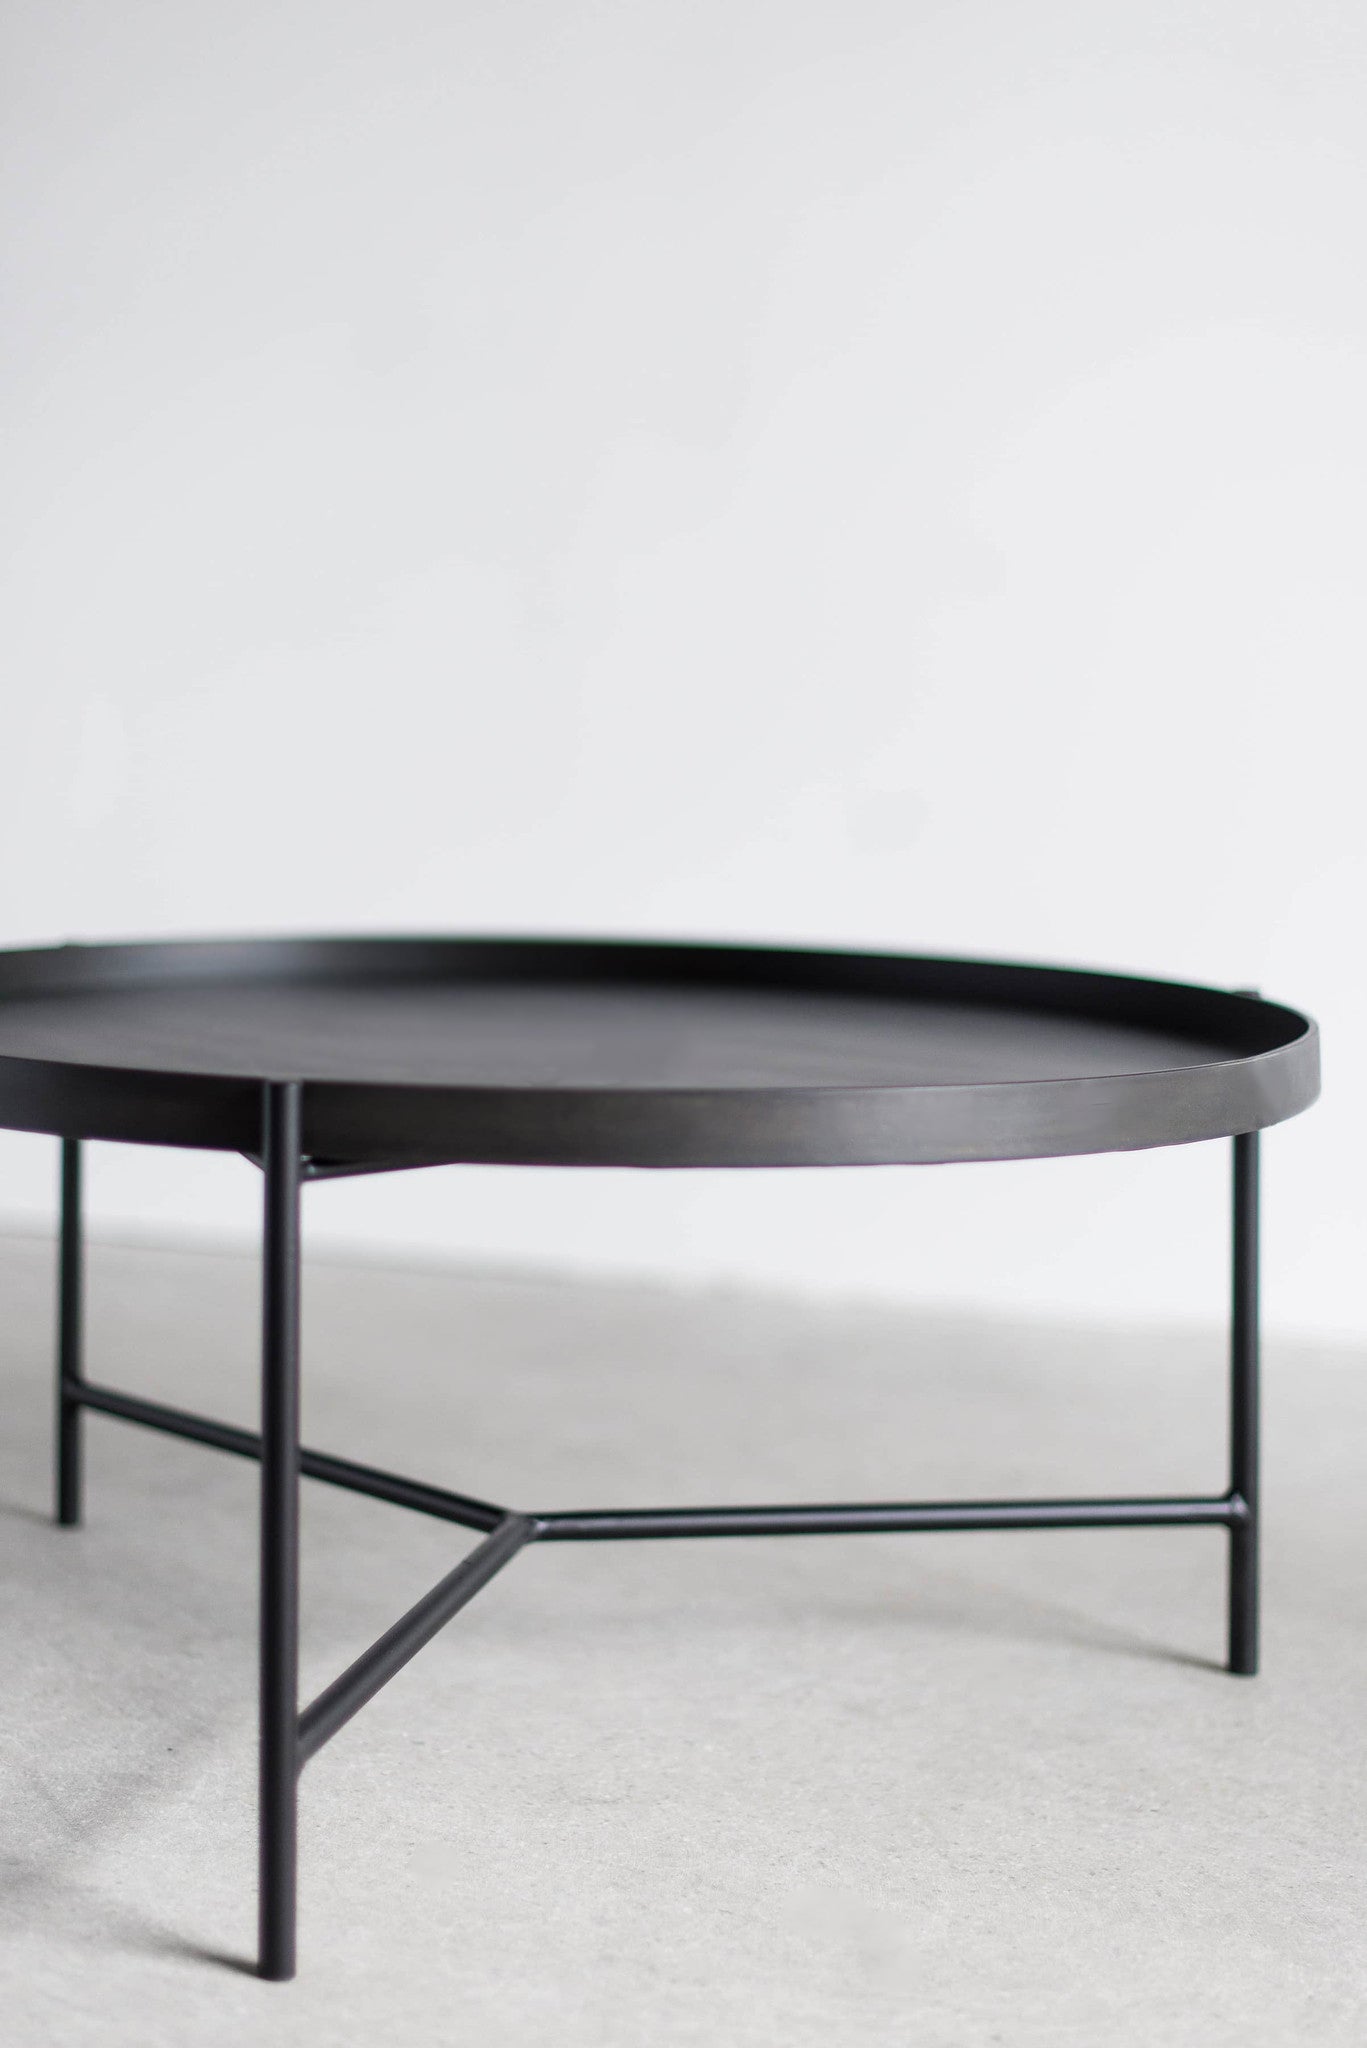 Bronson Coffee table - low shot of round all steel coffee table